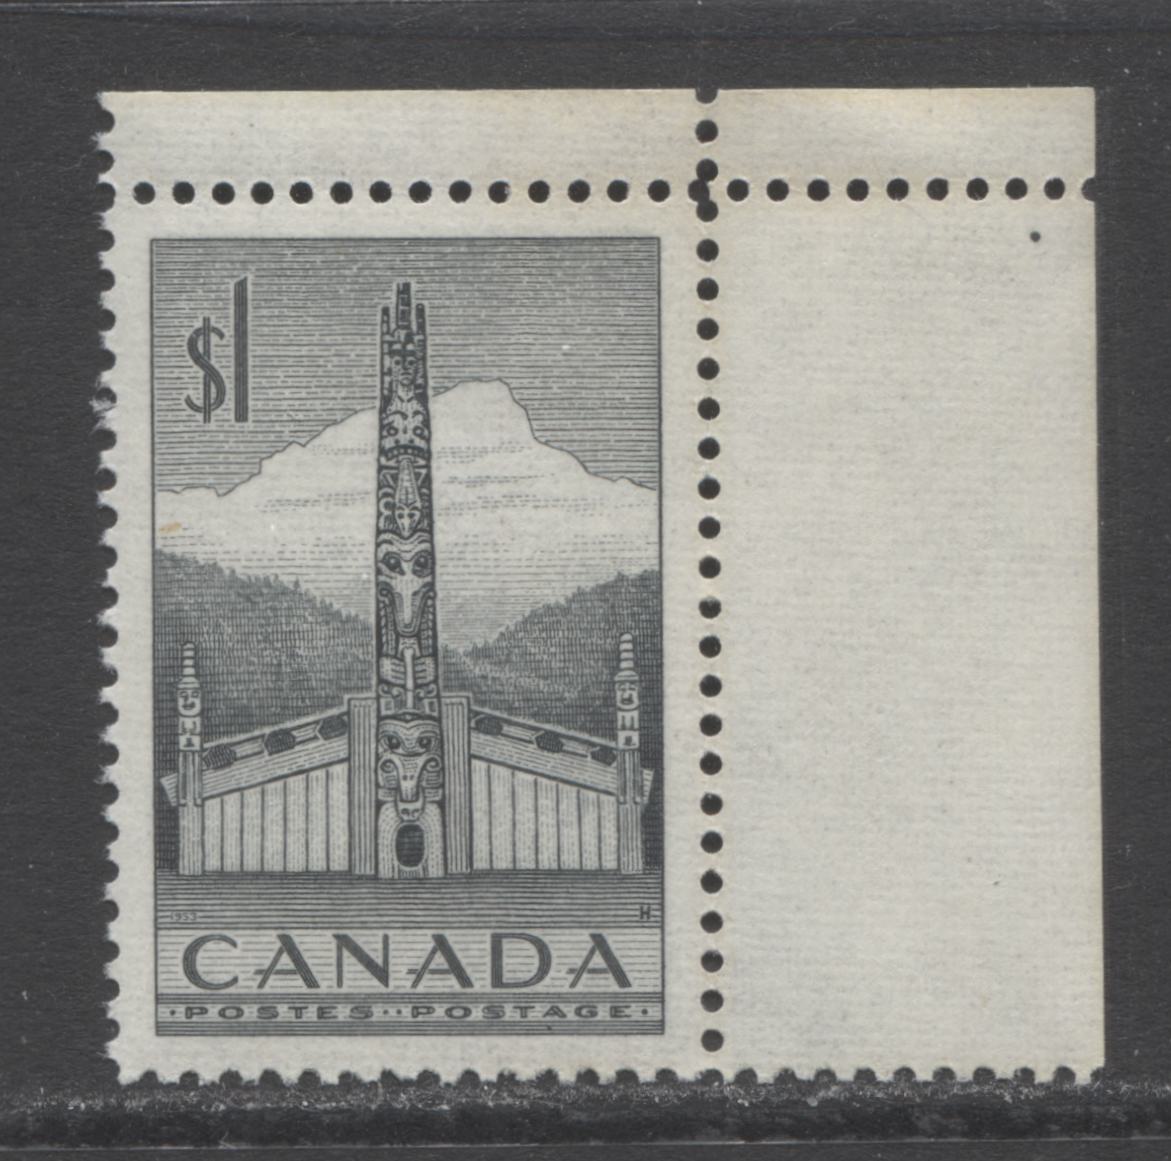 Lot 43 Canada #321 $1 Slate Gray Pacific Coast Totem Pole, 1953 Totem Pole Issue, A VFNH Single On Horizontal Ribbed Paper With Perf 11.95 x 12